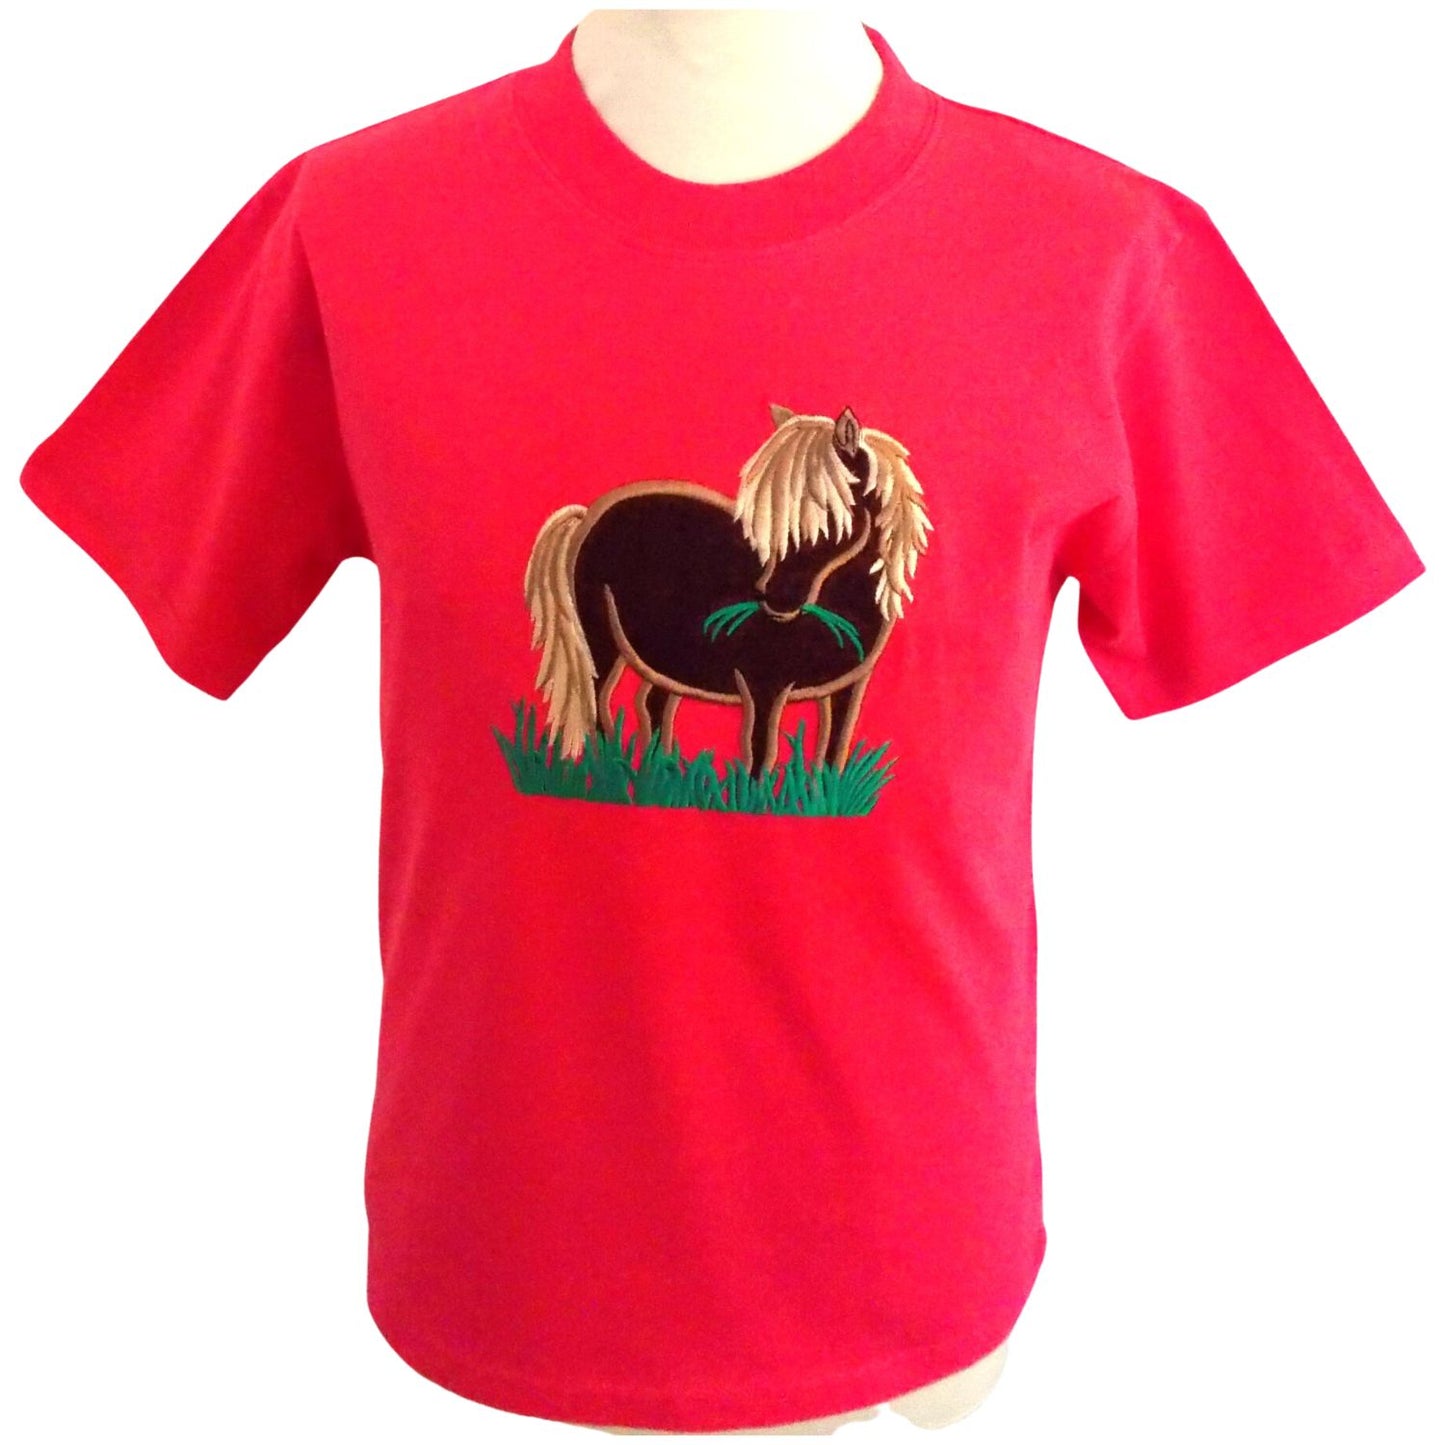 A fuschia pink short sleeve, round necked T-shirt featuring an embroidered design of a brown shetland pony with a cream mane and tail eating a mouthful of grass